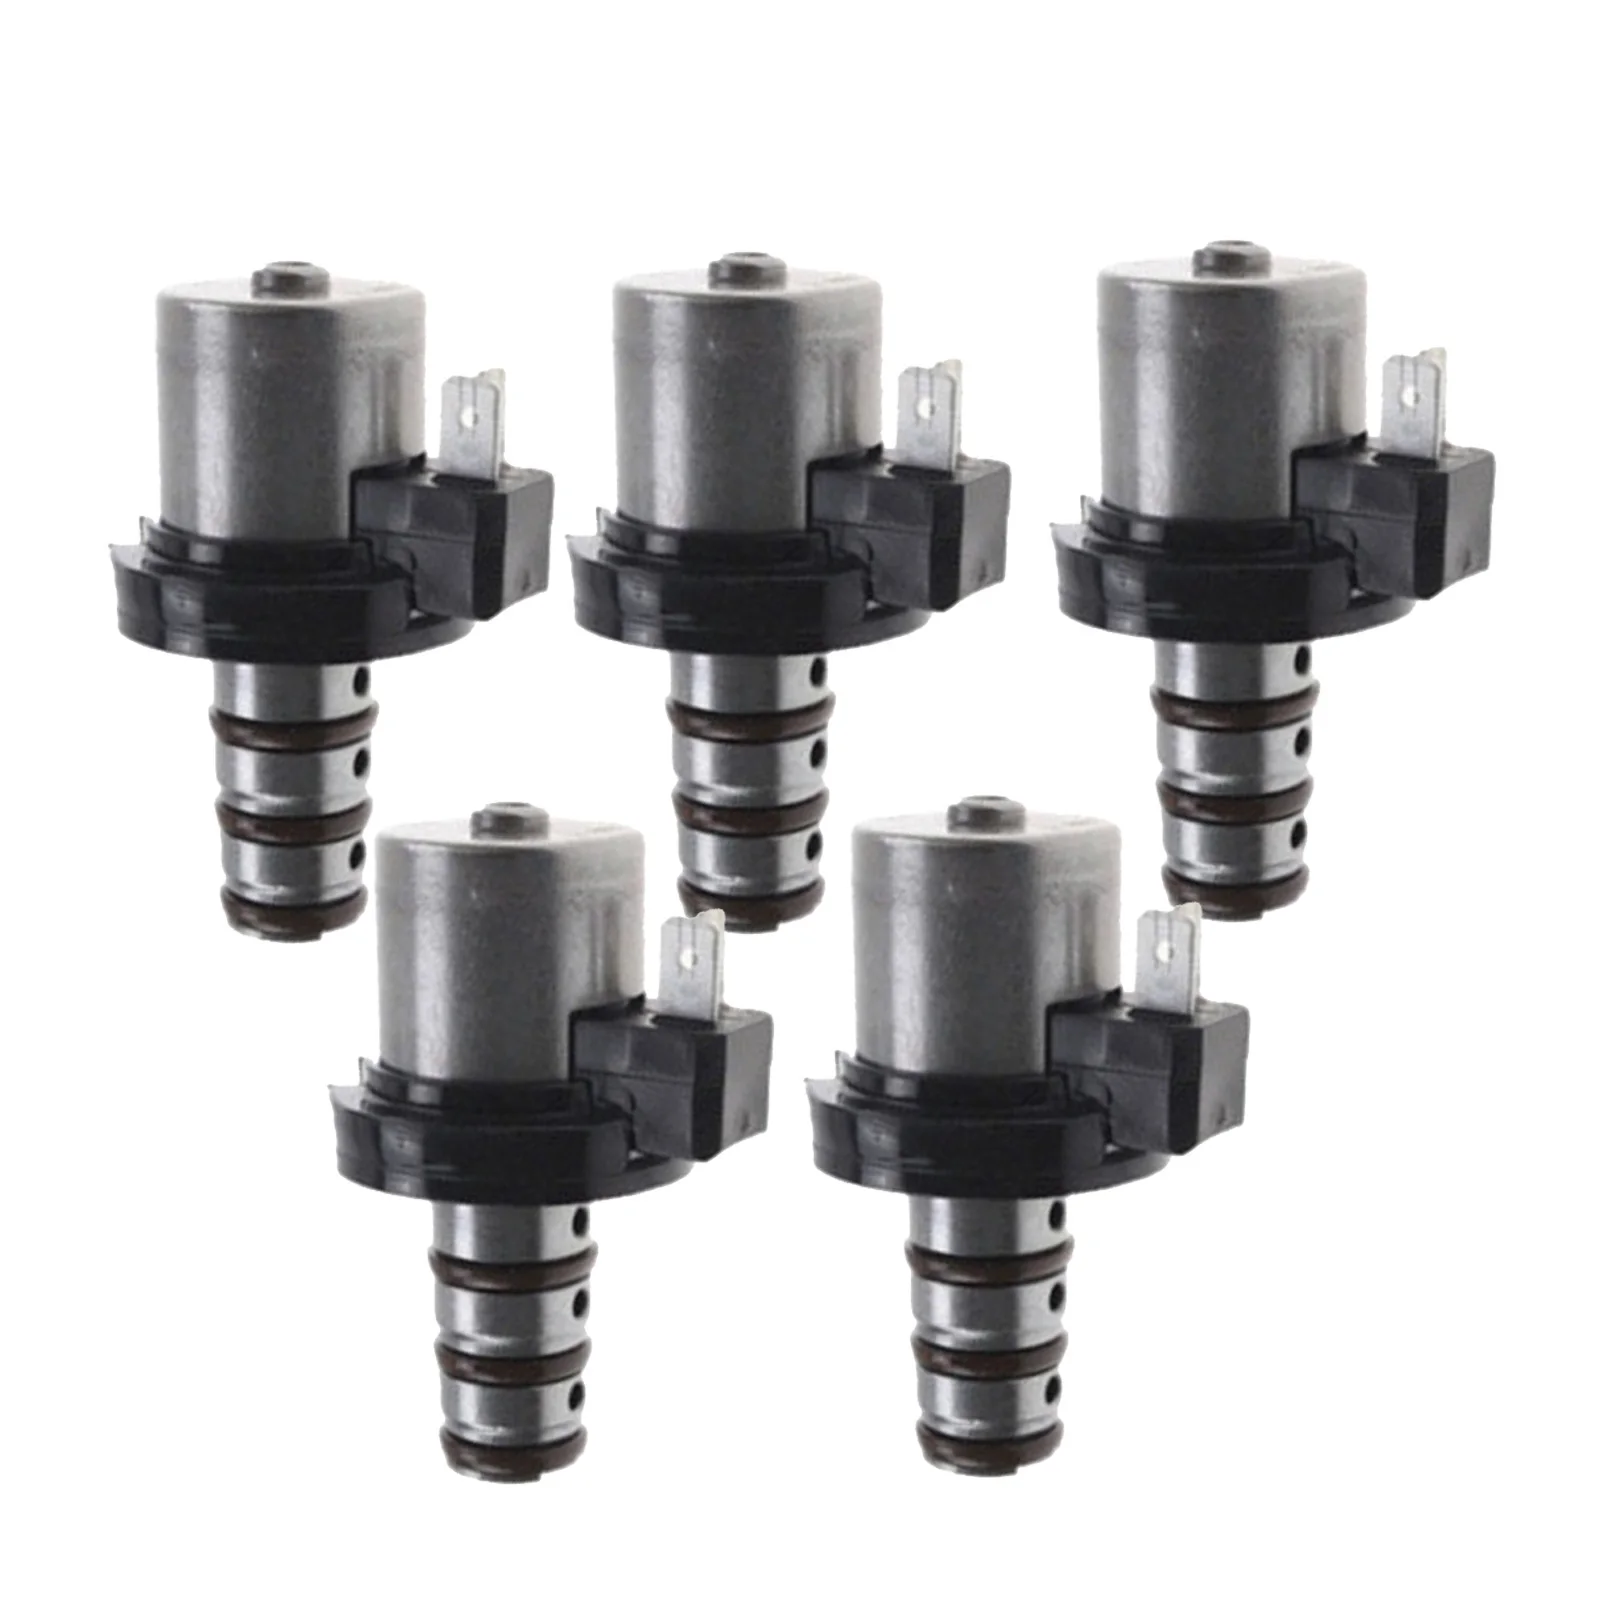 5-Pack Transmission Solenoid Valve Set F4A51 MD758981 V4A51 F4A41 Replacement Fit for Hyundai for Chrysler for 